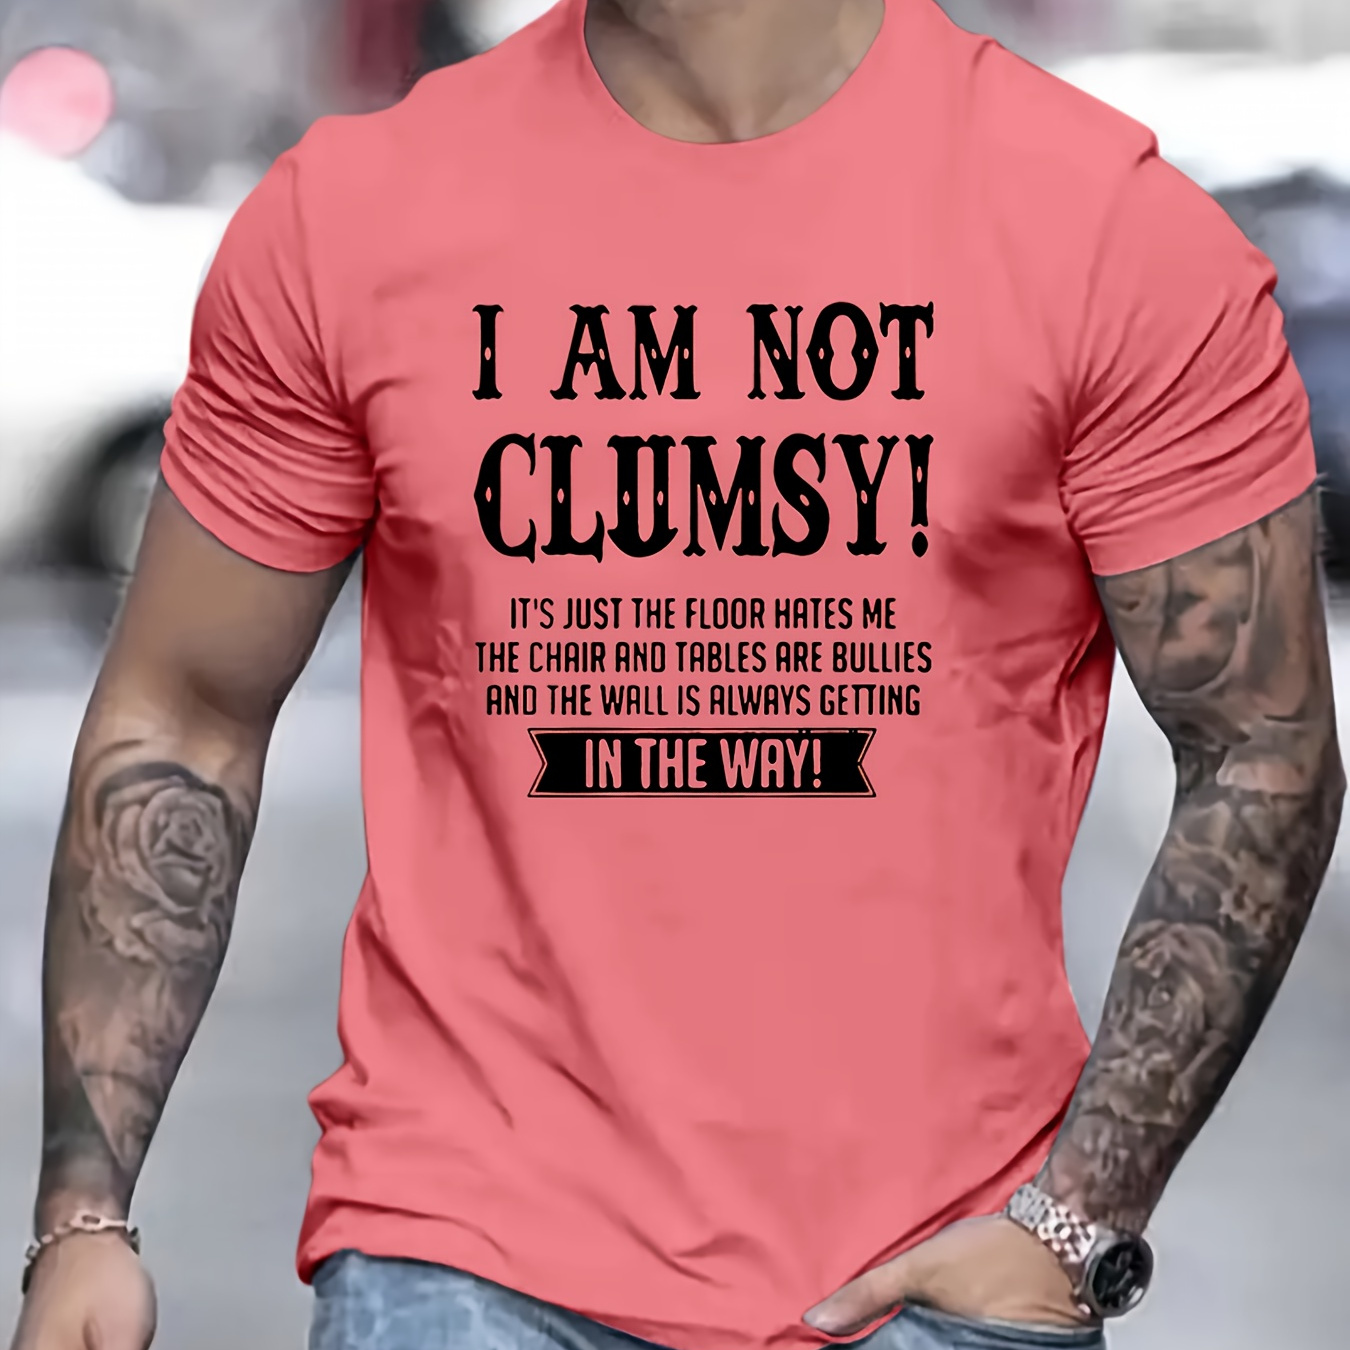 

I Am Not Clumsy Print T Shirt, Tees For Men, Casual Short Sleeve T-shirt For Summer